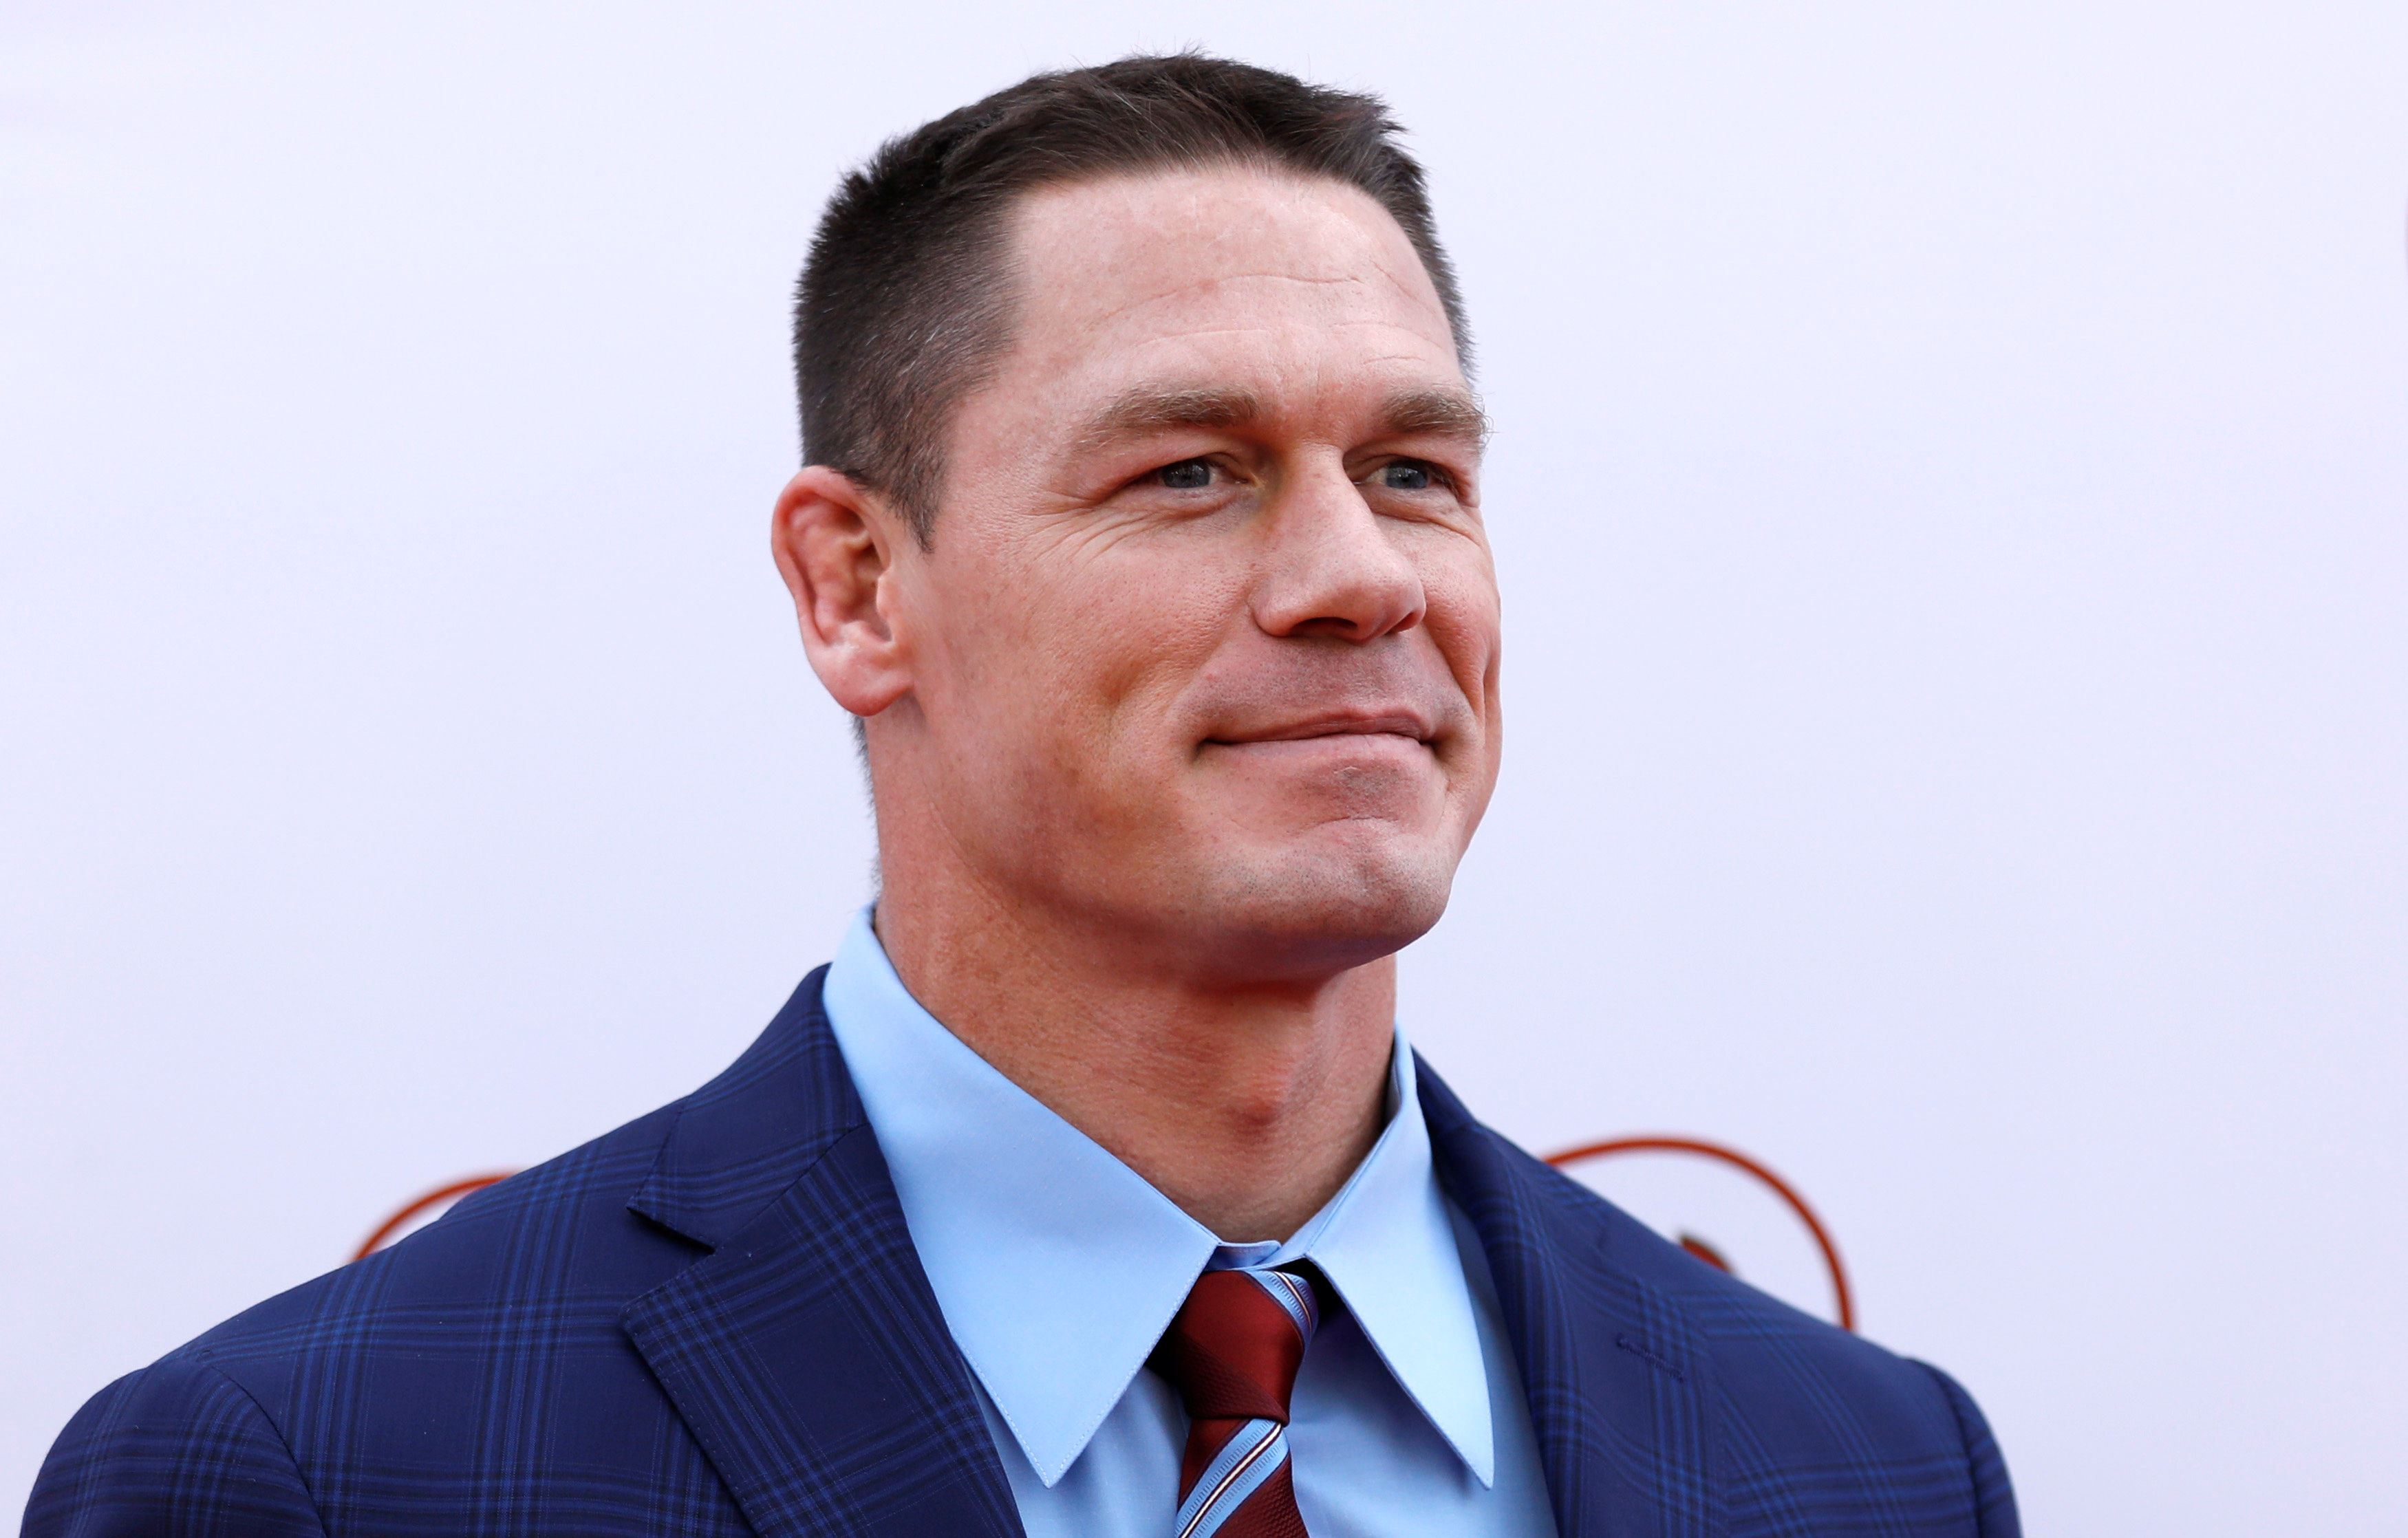 Cast member Cena poses at the premiere for 